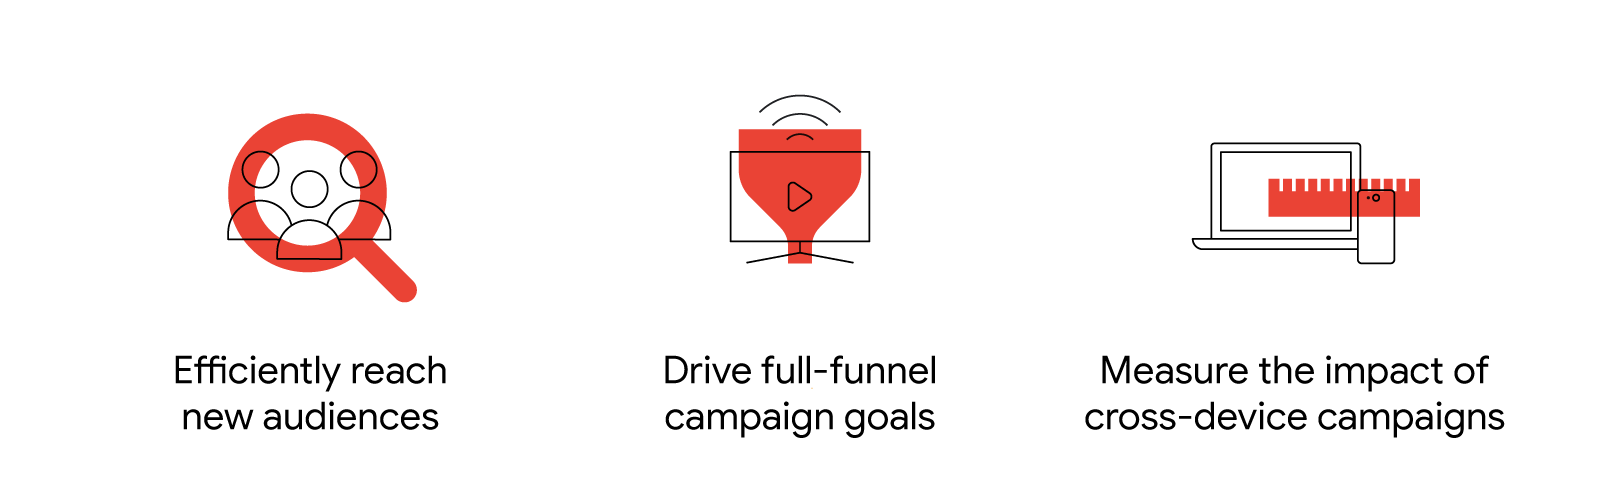 Efficiently reach new audiences. Drive full-funnel campaign goals. Measure the impact of cross-device campaigns.